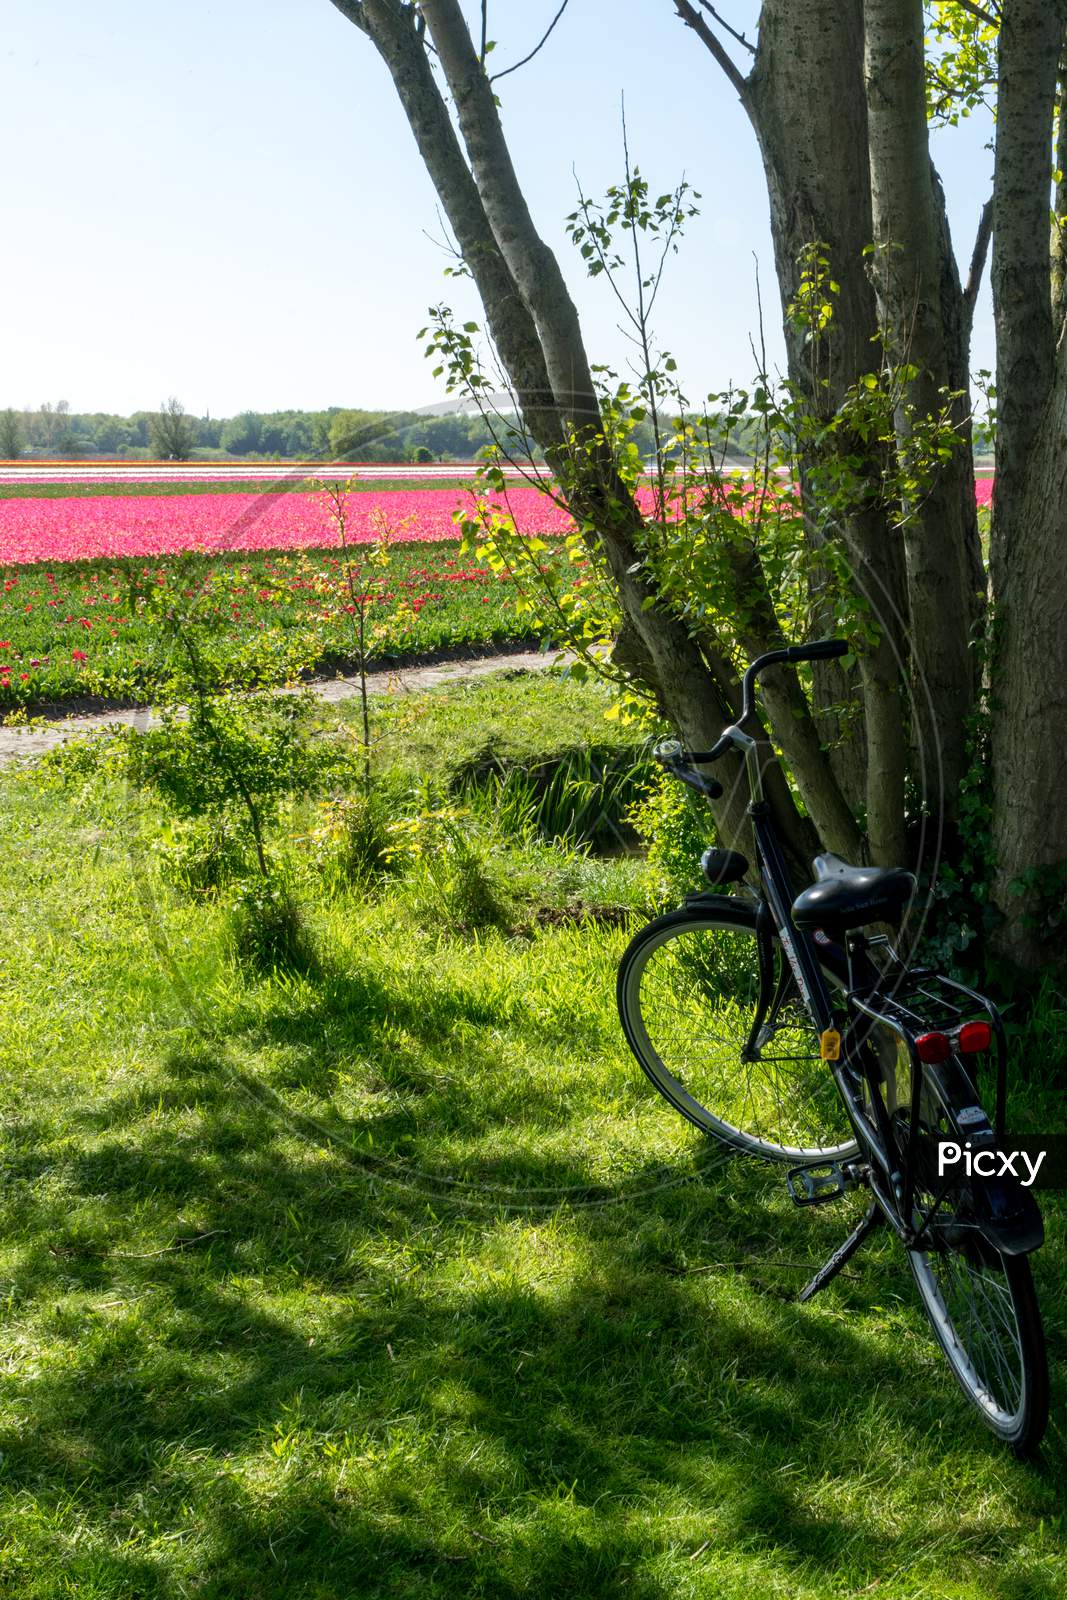 Lisse, Netherlands - 5 May 2018:  Cycles Parked Alongside A Tulip Field